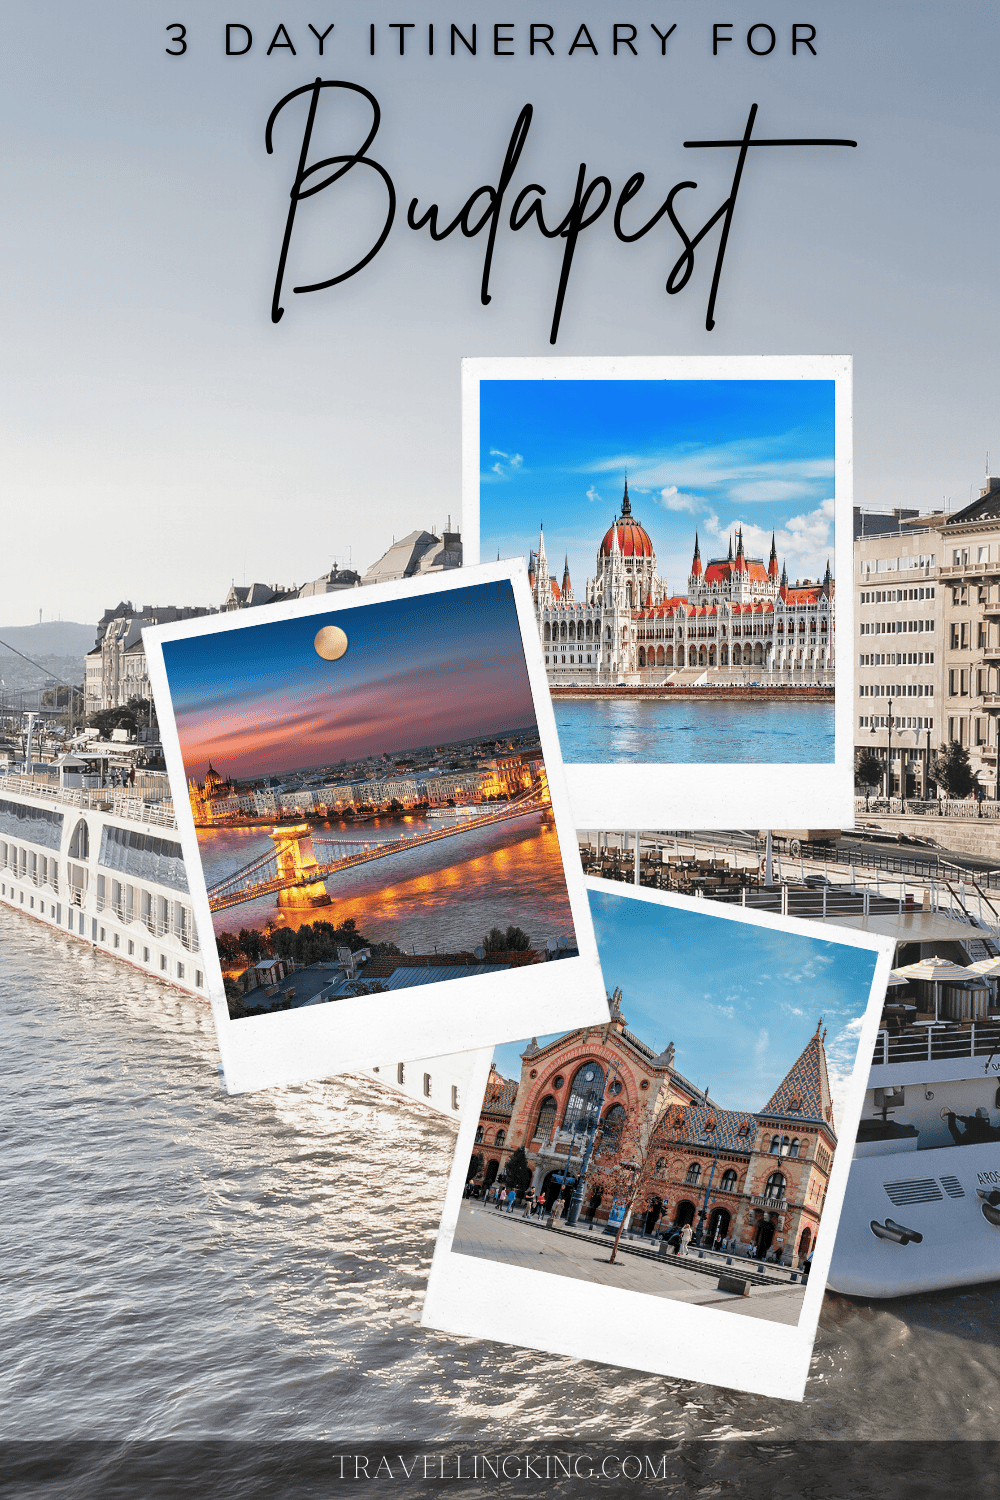 3 Day Itinerary for Budapest 